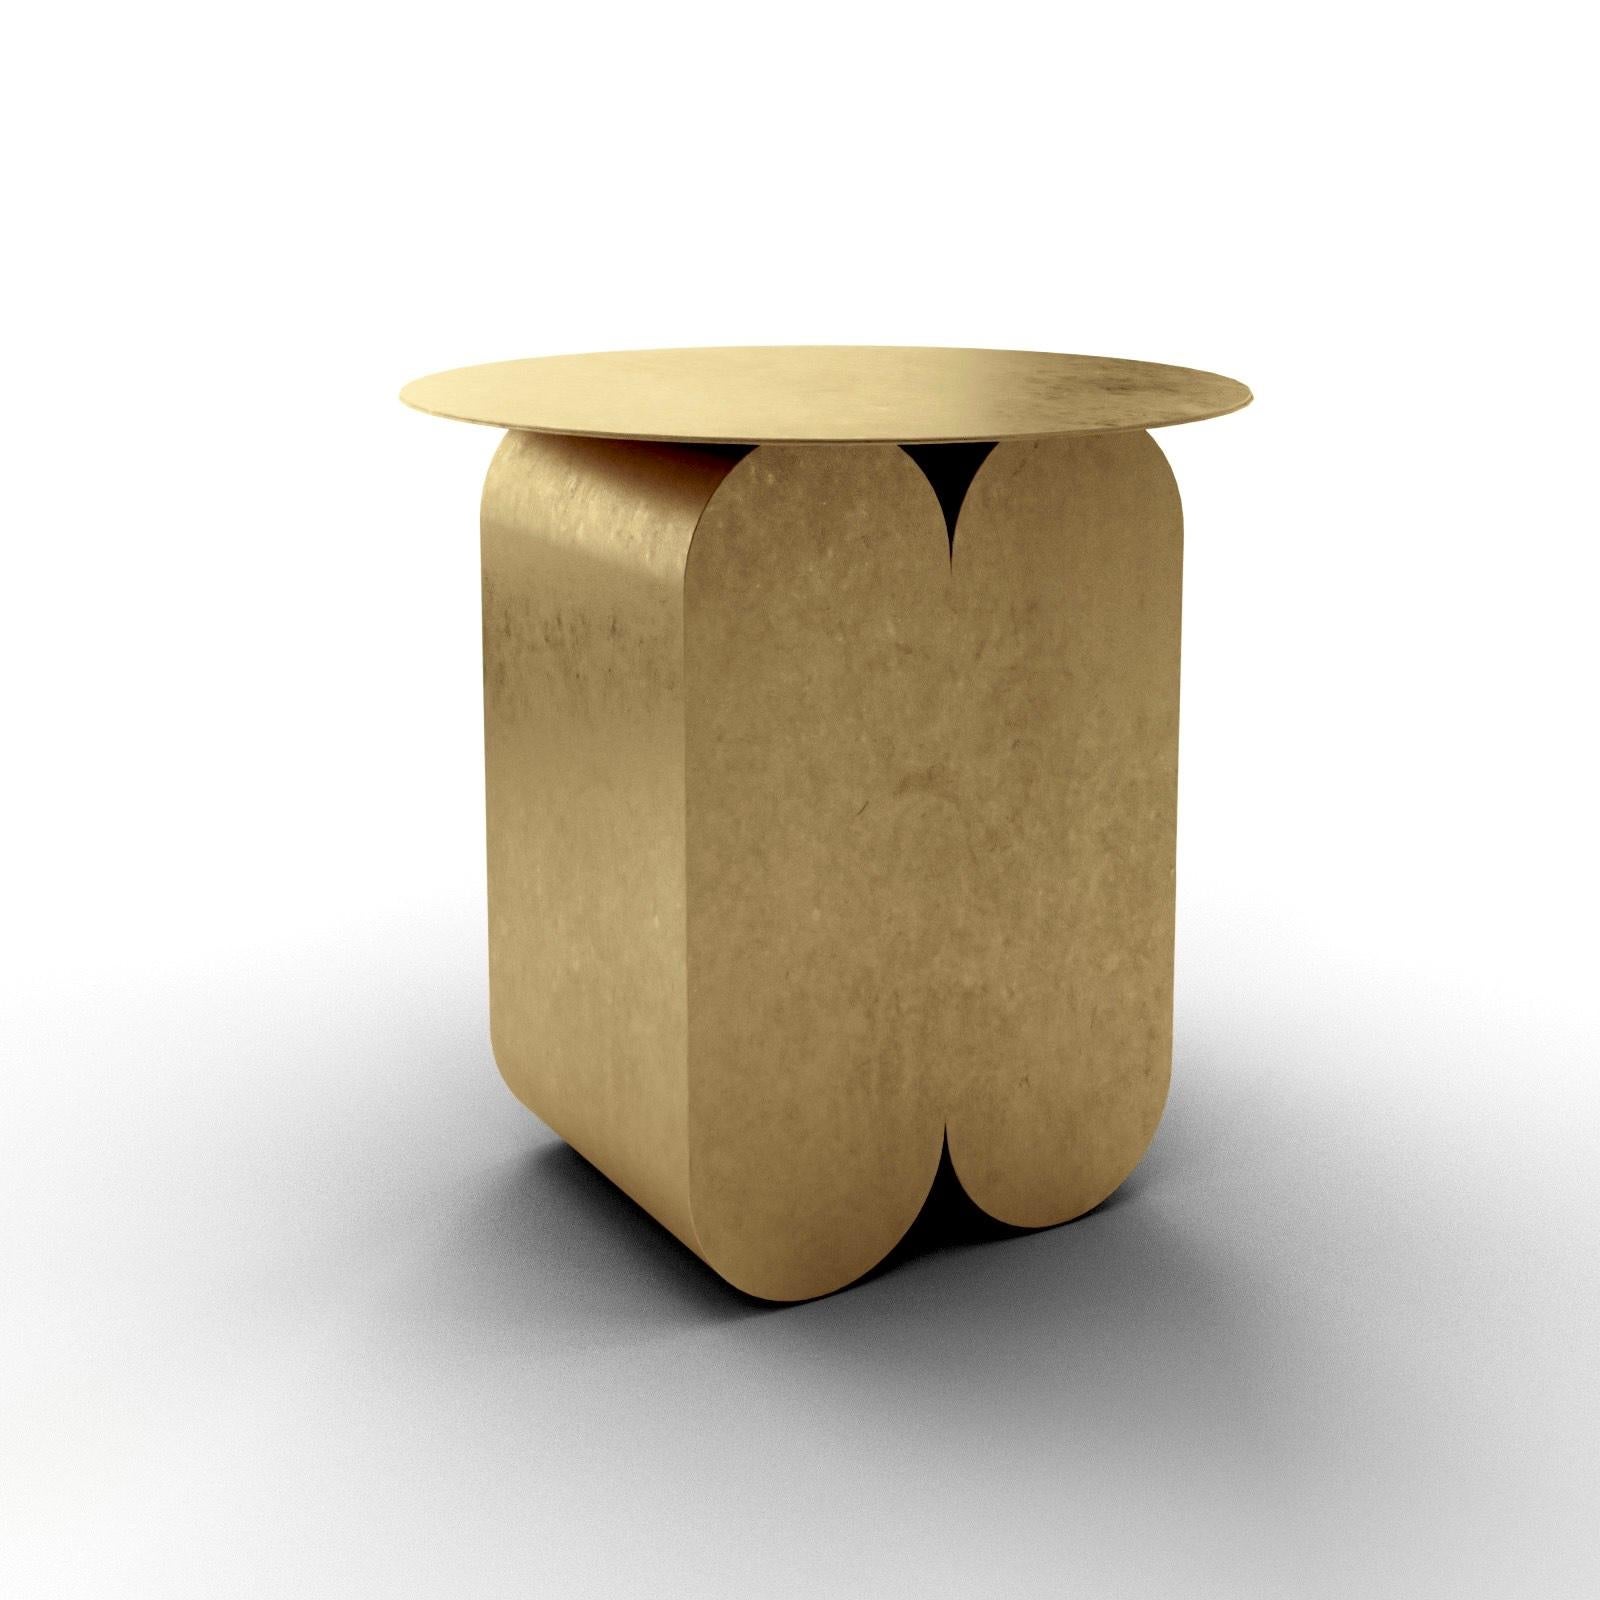 Gold full arches arcade side table by Kasadamo
Limited Edition of 30
Dimensions: D 50 x H 50 cm
Materials: stainless steel

Kasadamo is about uniqueness, visions and exclusivity, a brand that was designed to be different and